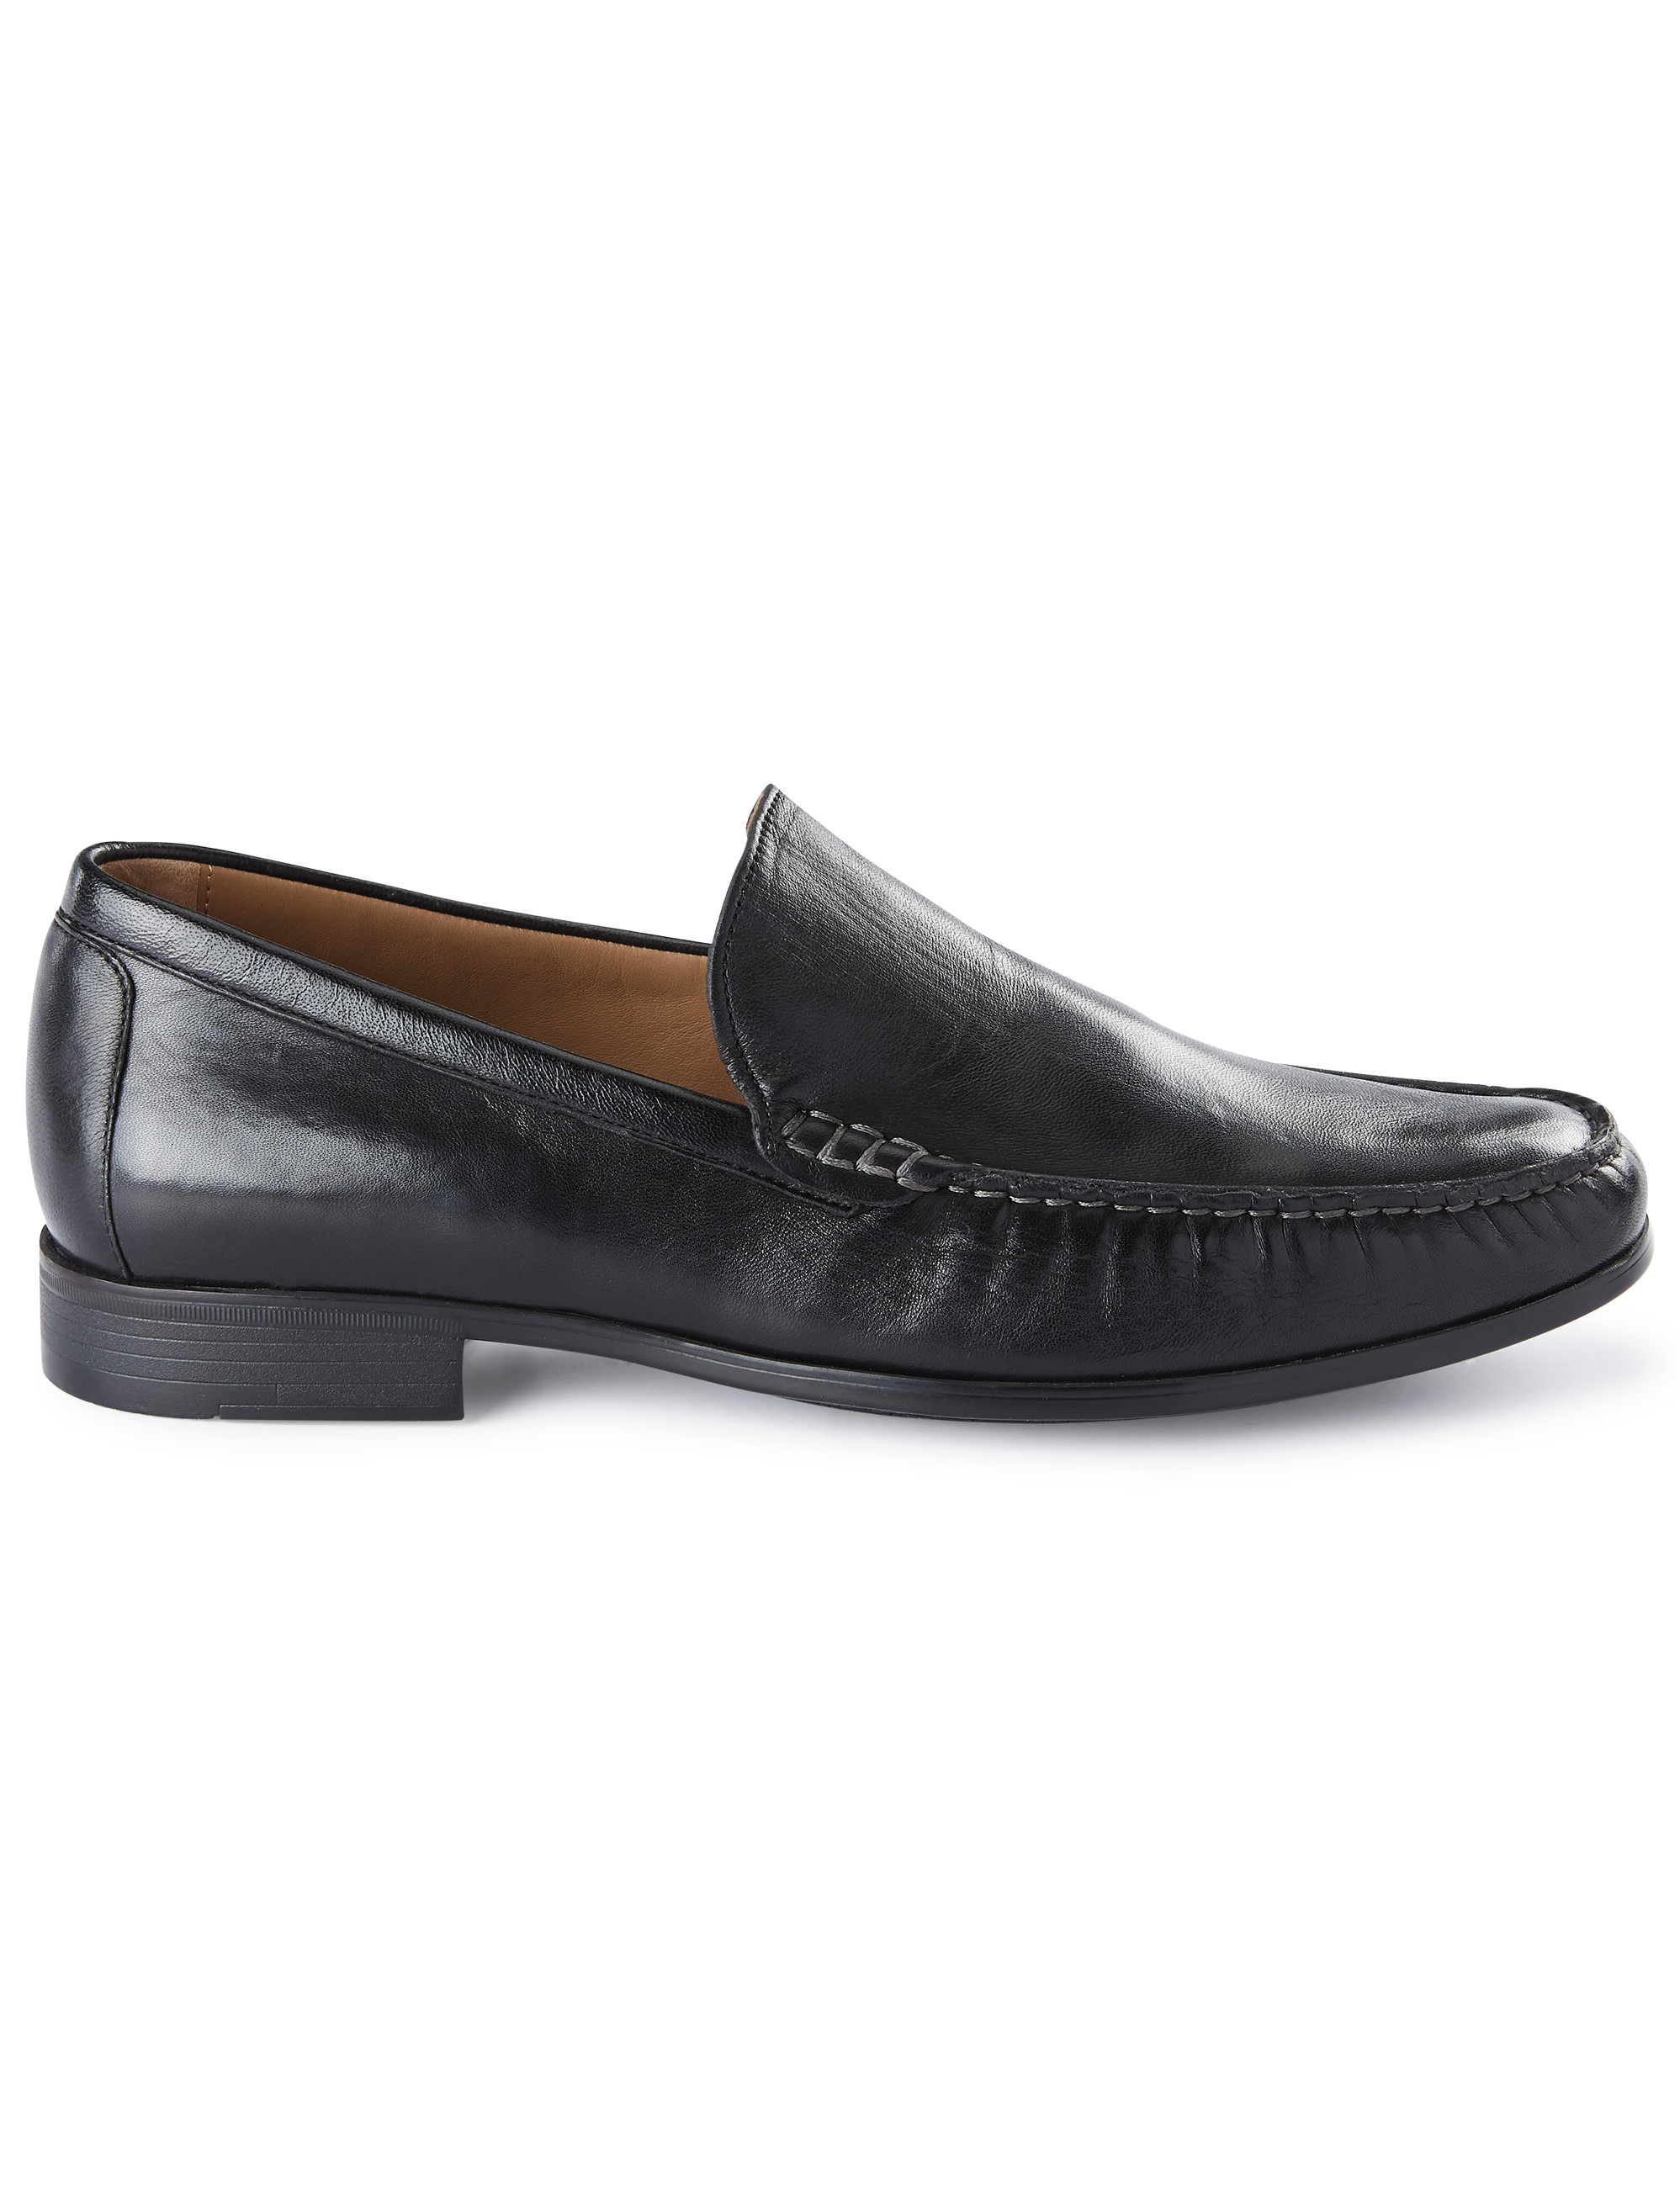 Cresswell Venetian Loafers